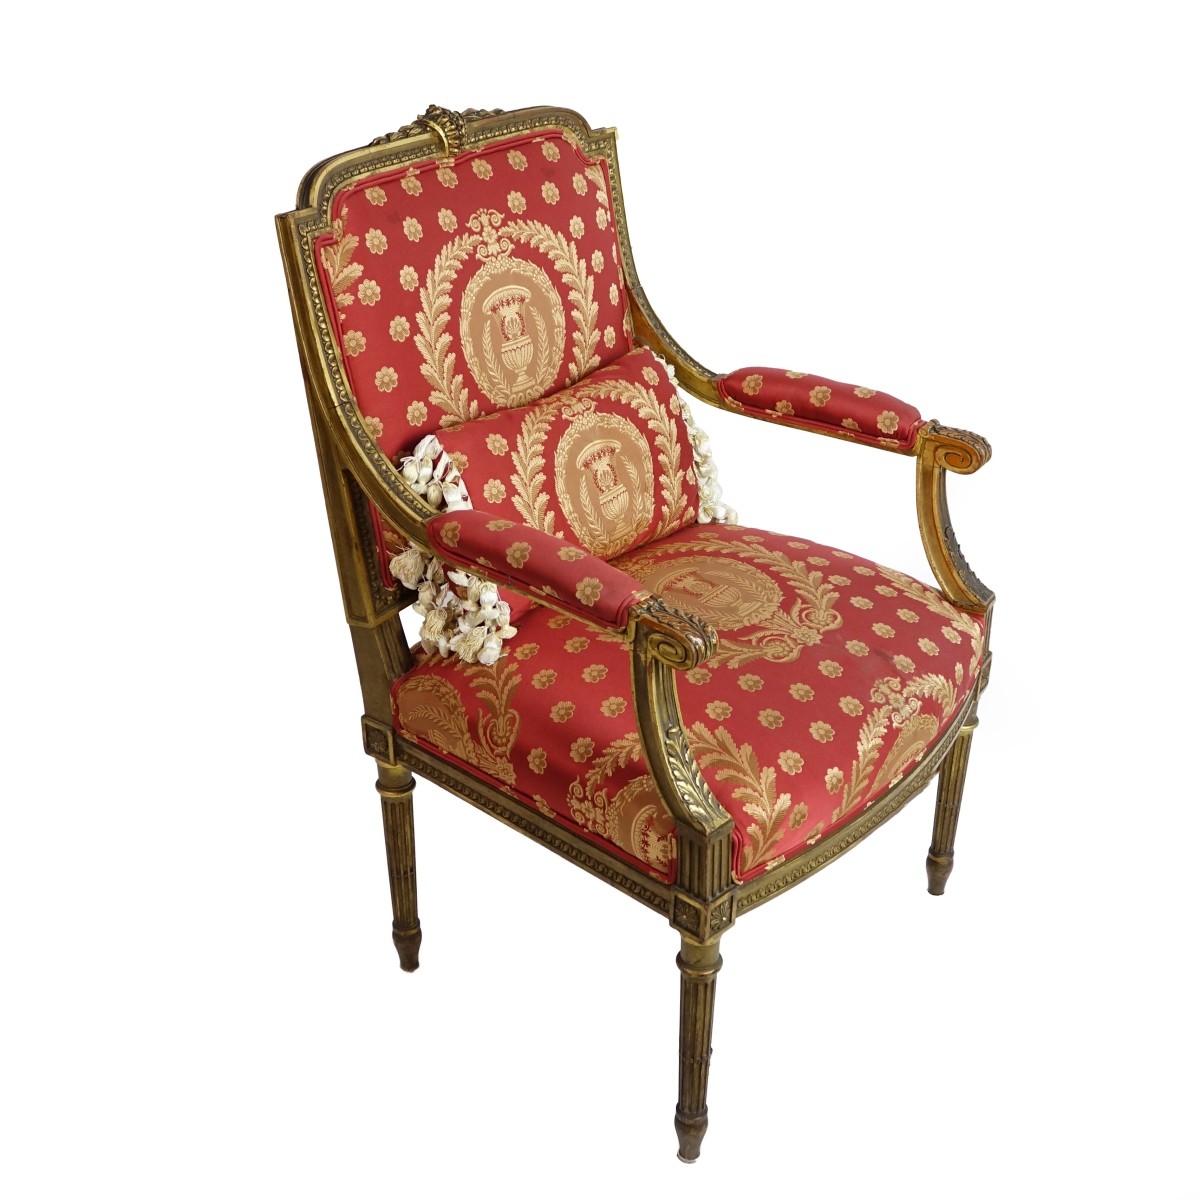 20th C. French Louis XVI Style Armchair